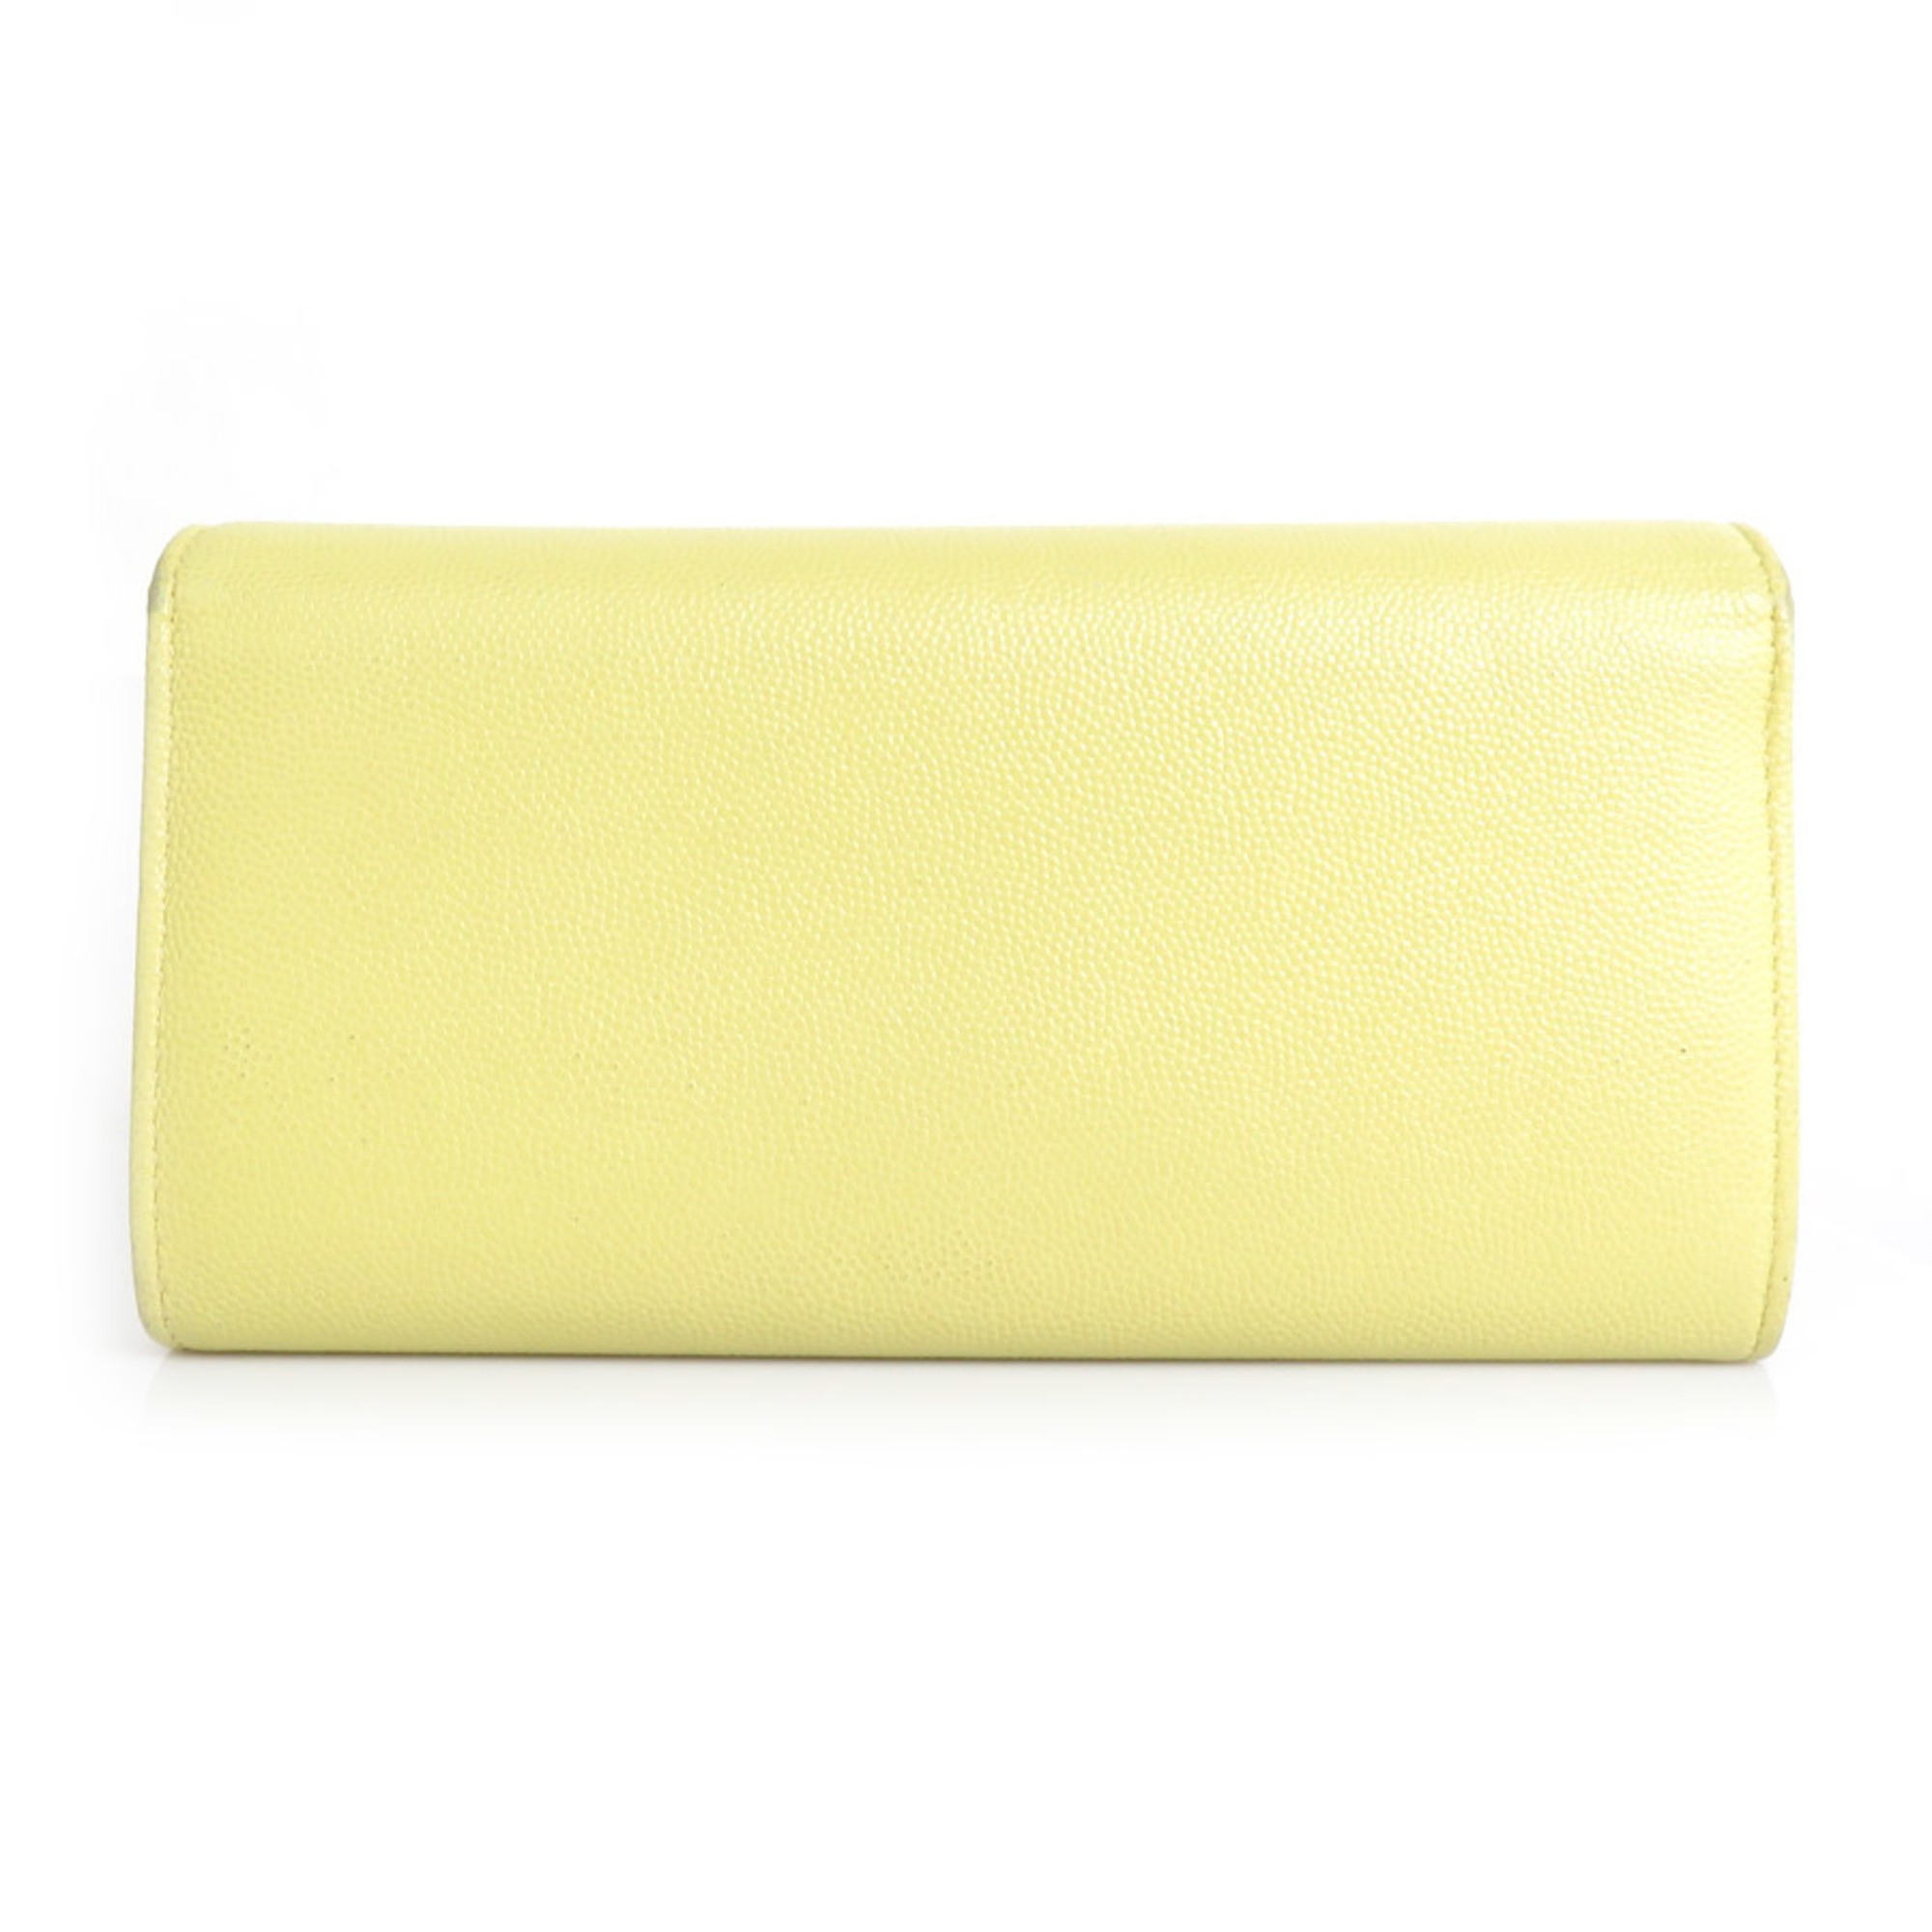 Chanel CHANEL Long Wallet Coco Mark Caviar Skin Leather Light Yellow Women's r9578a